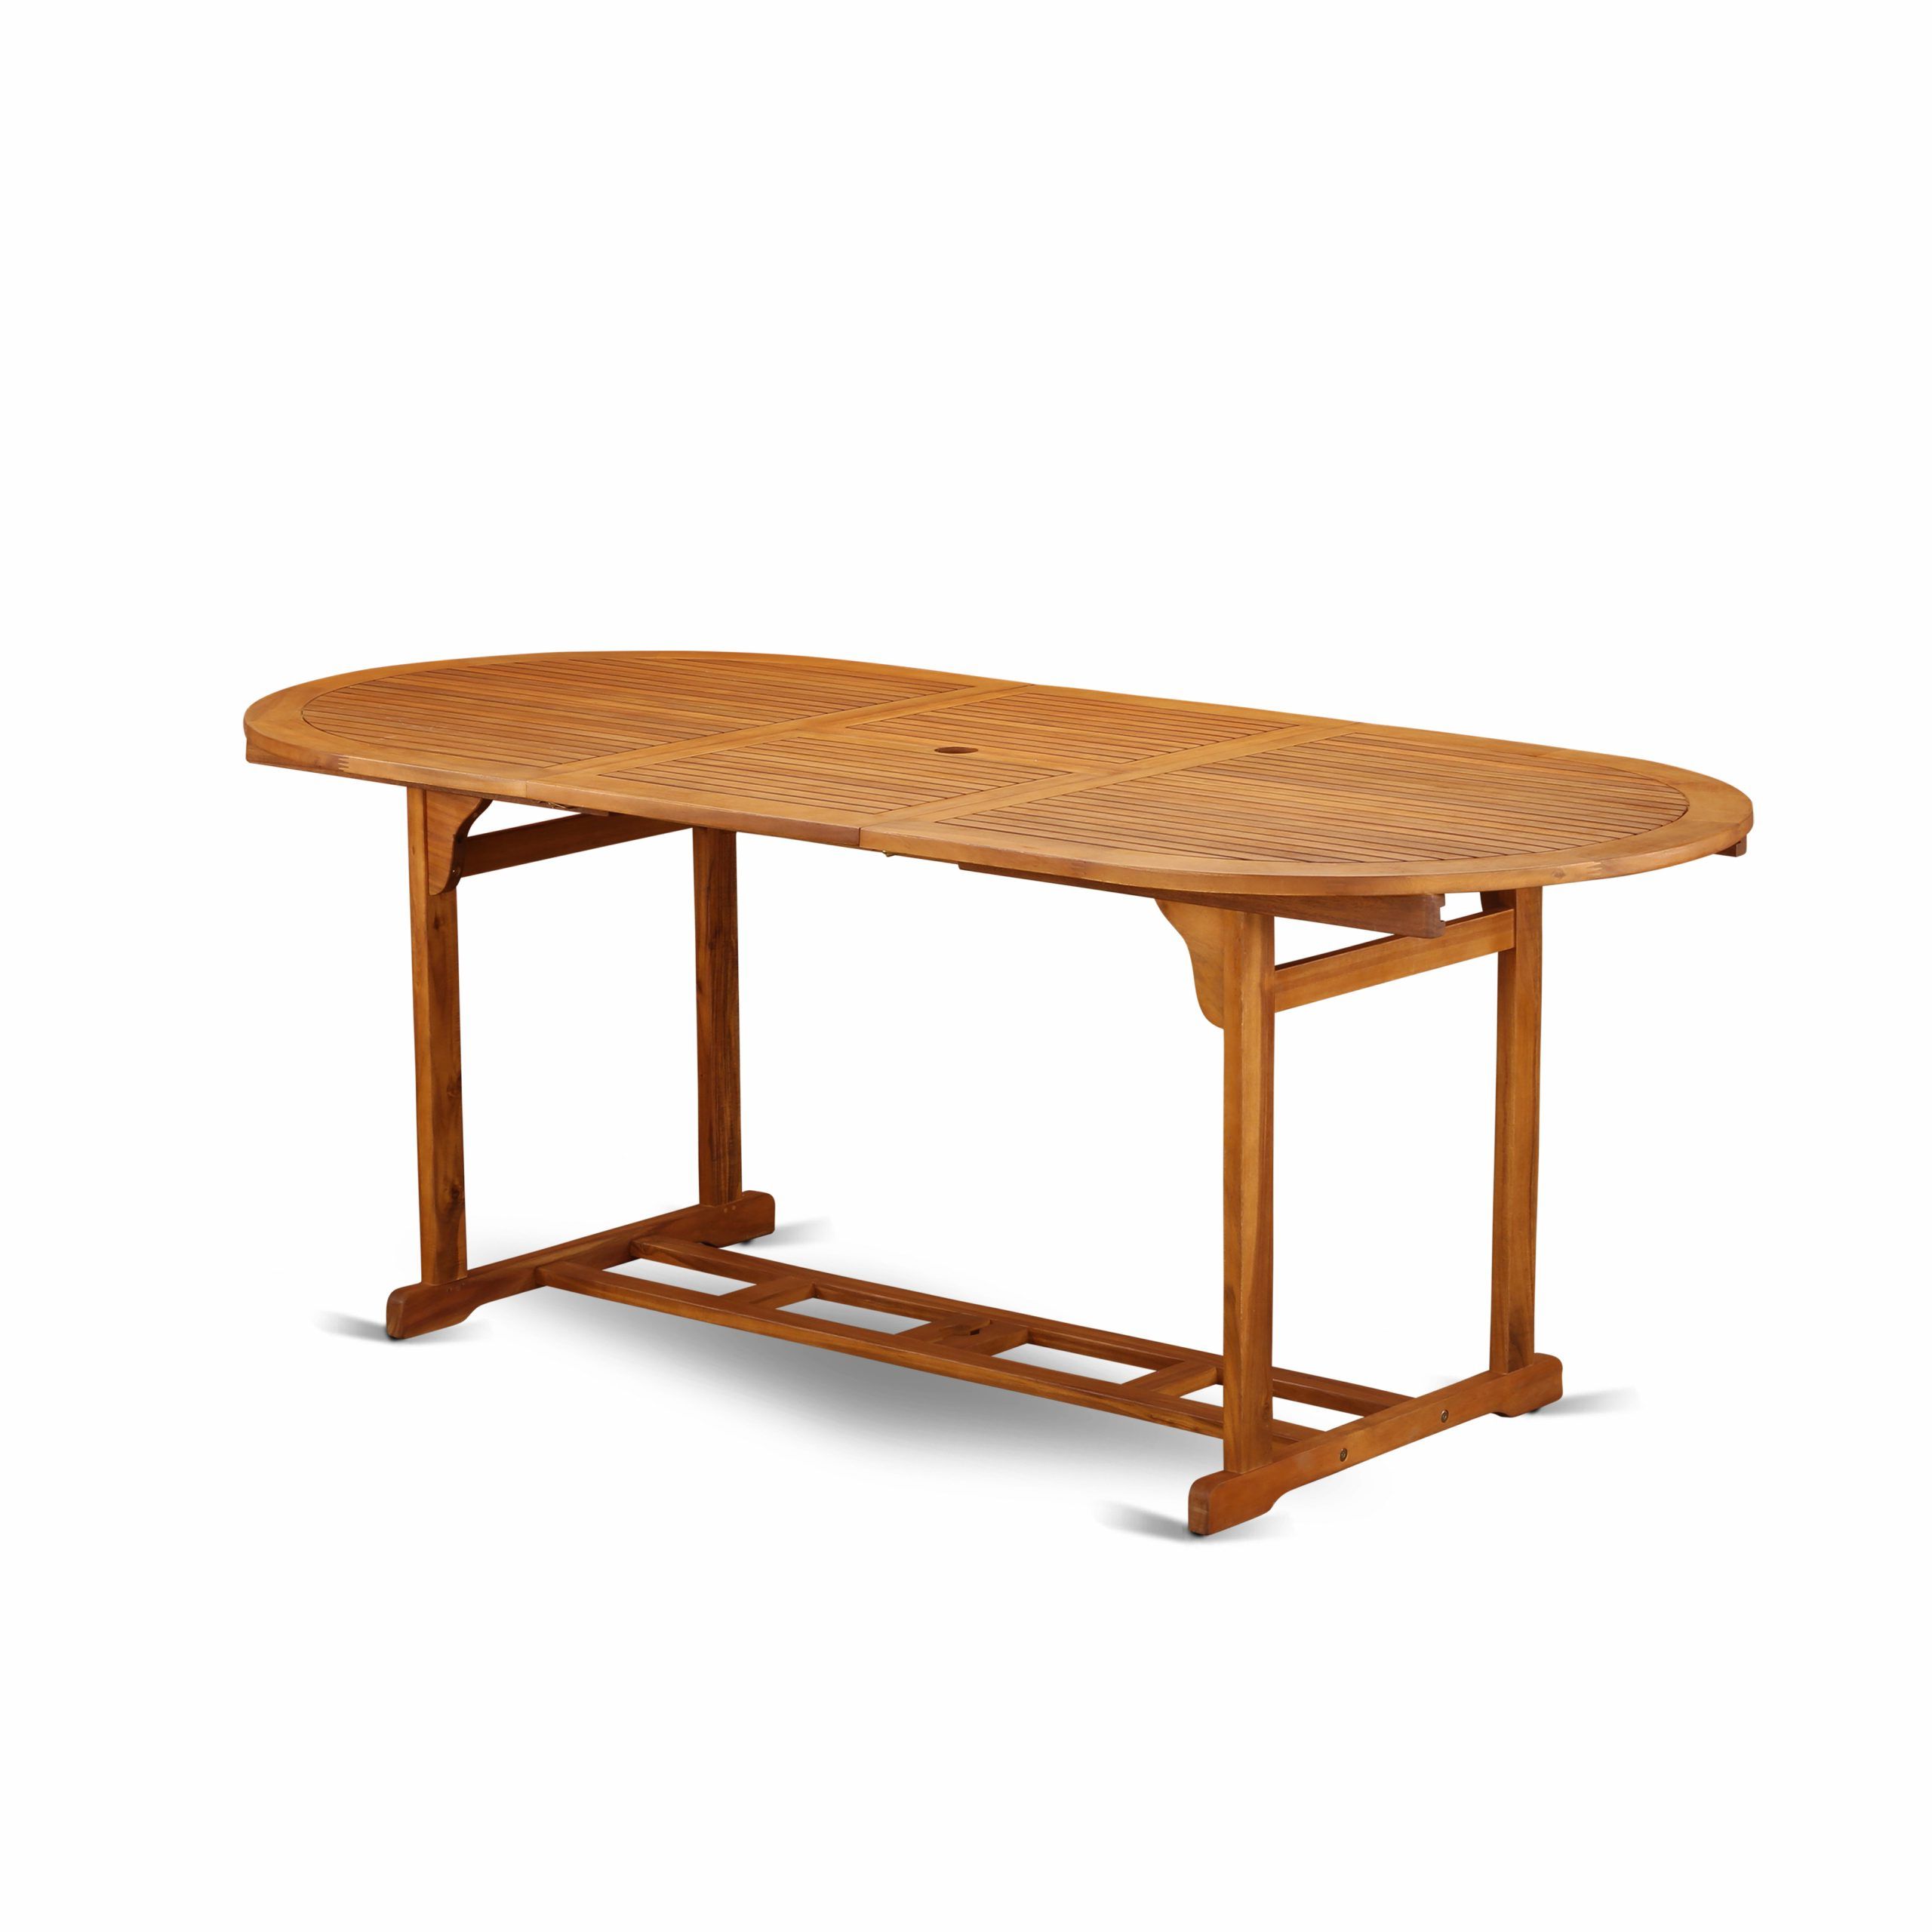 Bbstxna Oval Terrace Acacia Solid Wood Dining Table With Fashionable Folcroft Acacia Solid Wood Dining Tables (View 4 of 20)